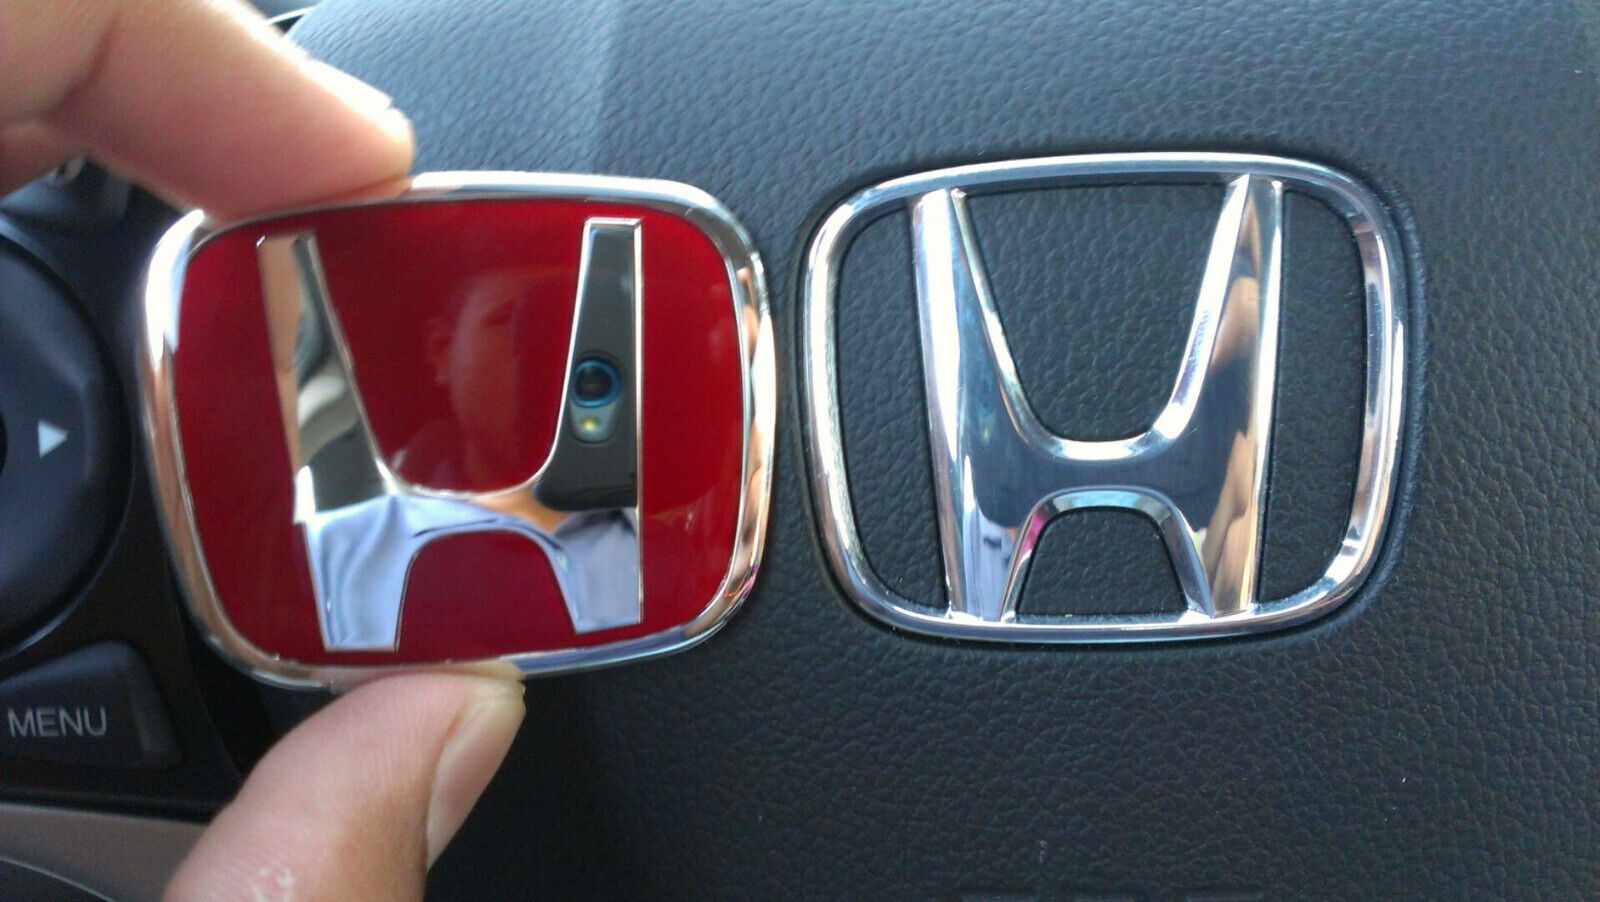 Accord FIT Civic JDM red steering wheel Type B emblem civic si s2000 Accord